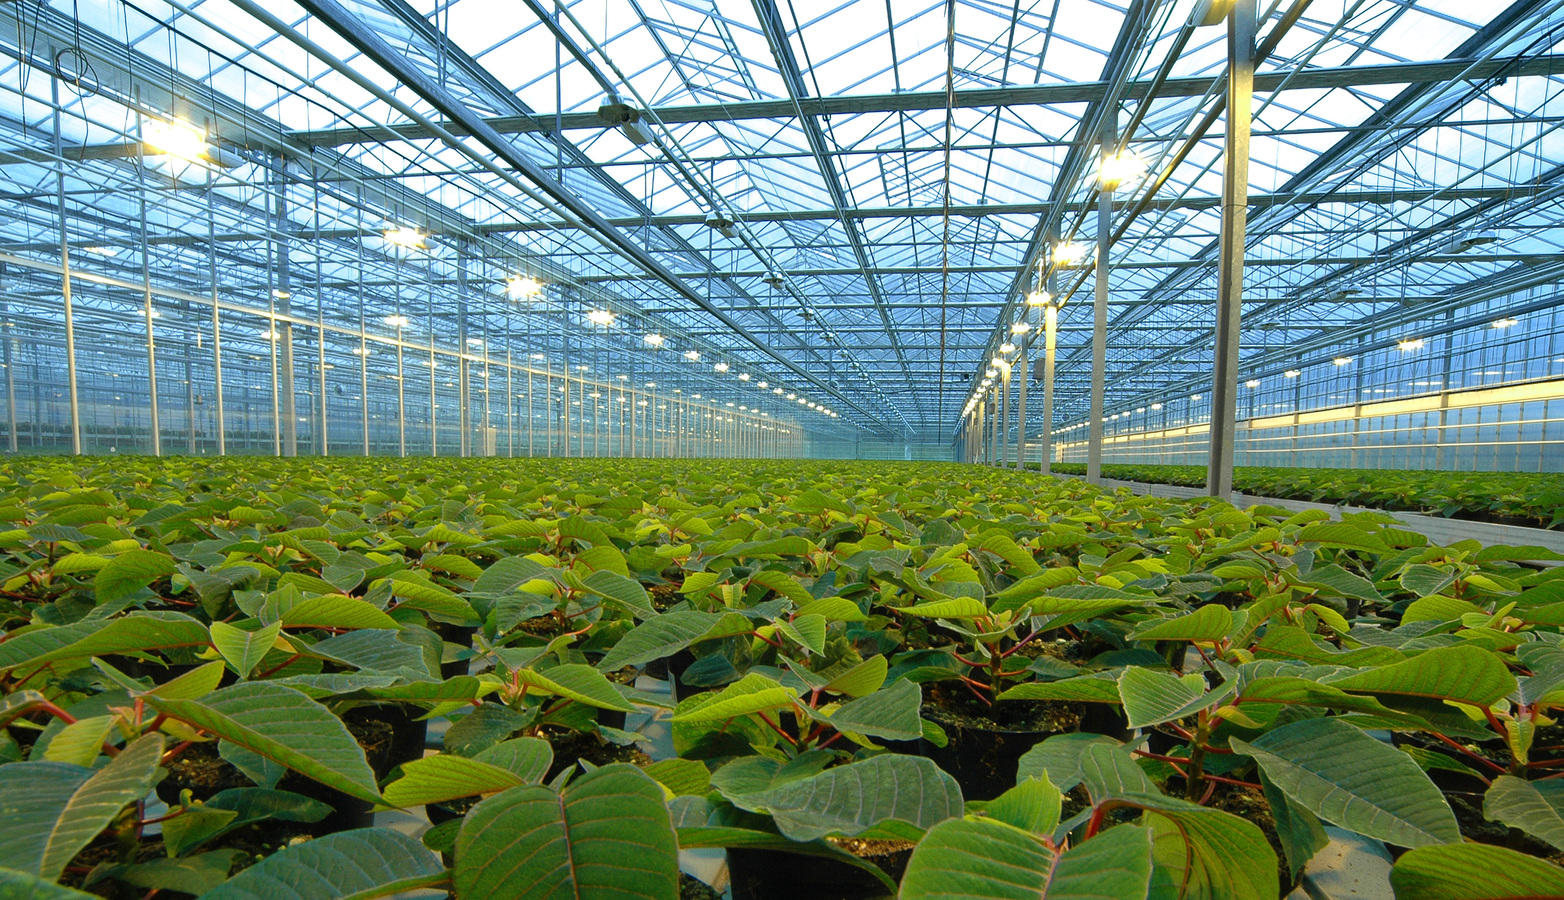 Greenhouse Horticulture Market Outlook and Opportunities in Grooming Regions : Edition 2019-2025